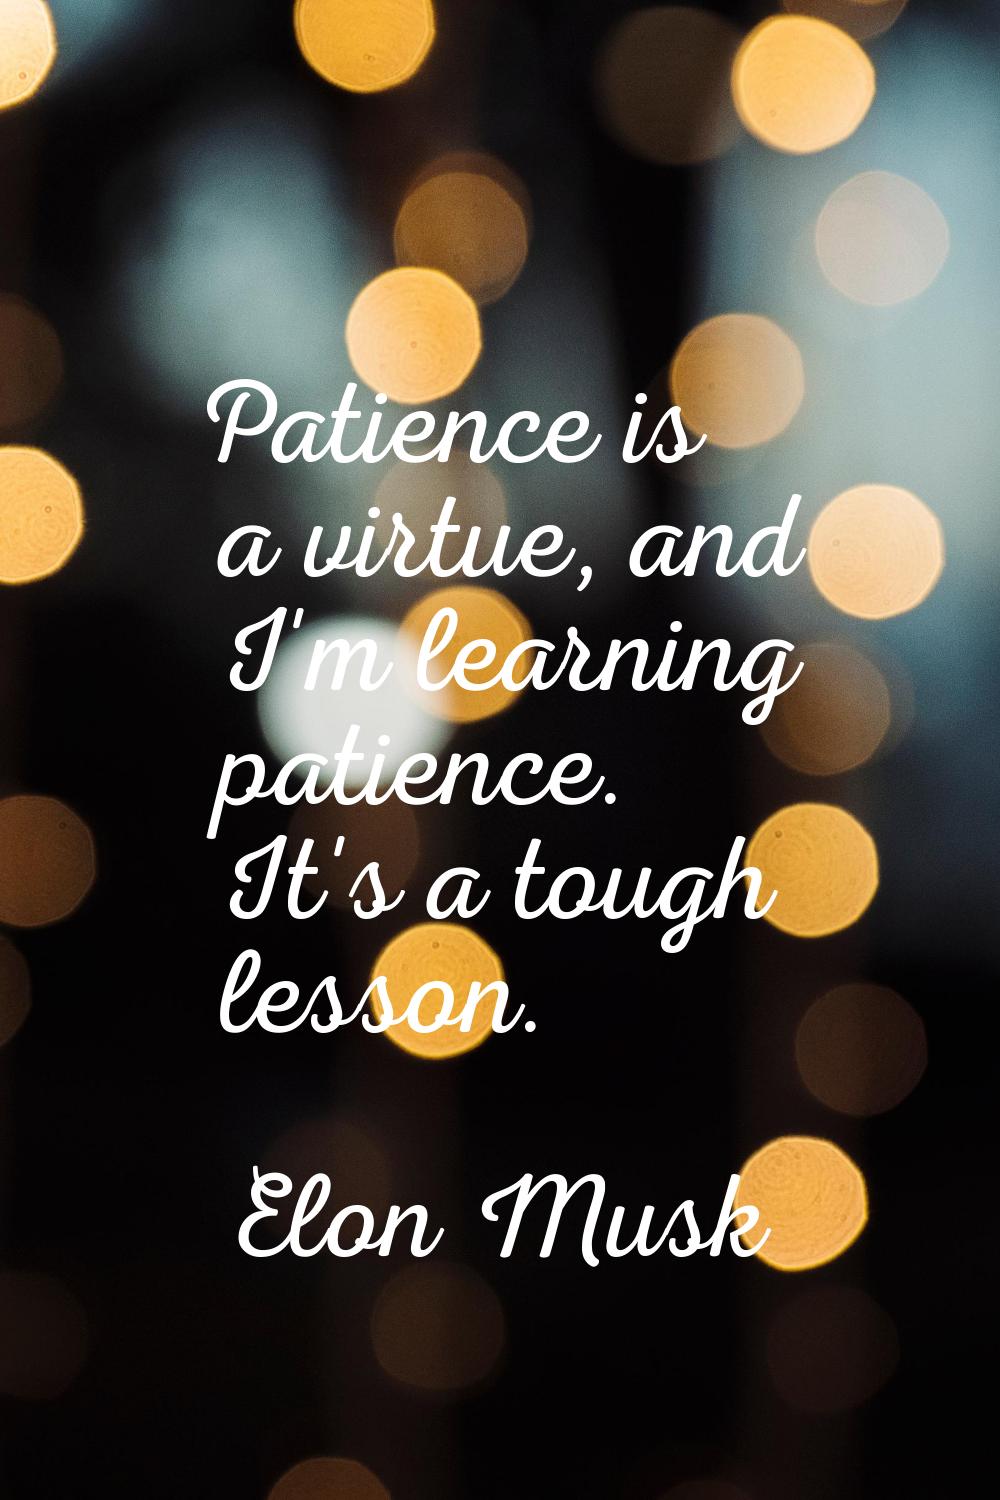 Patience is a virtue, and I'm learning patience. It's a tough lesson.